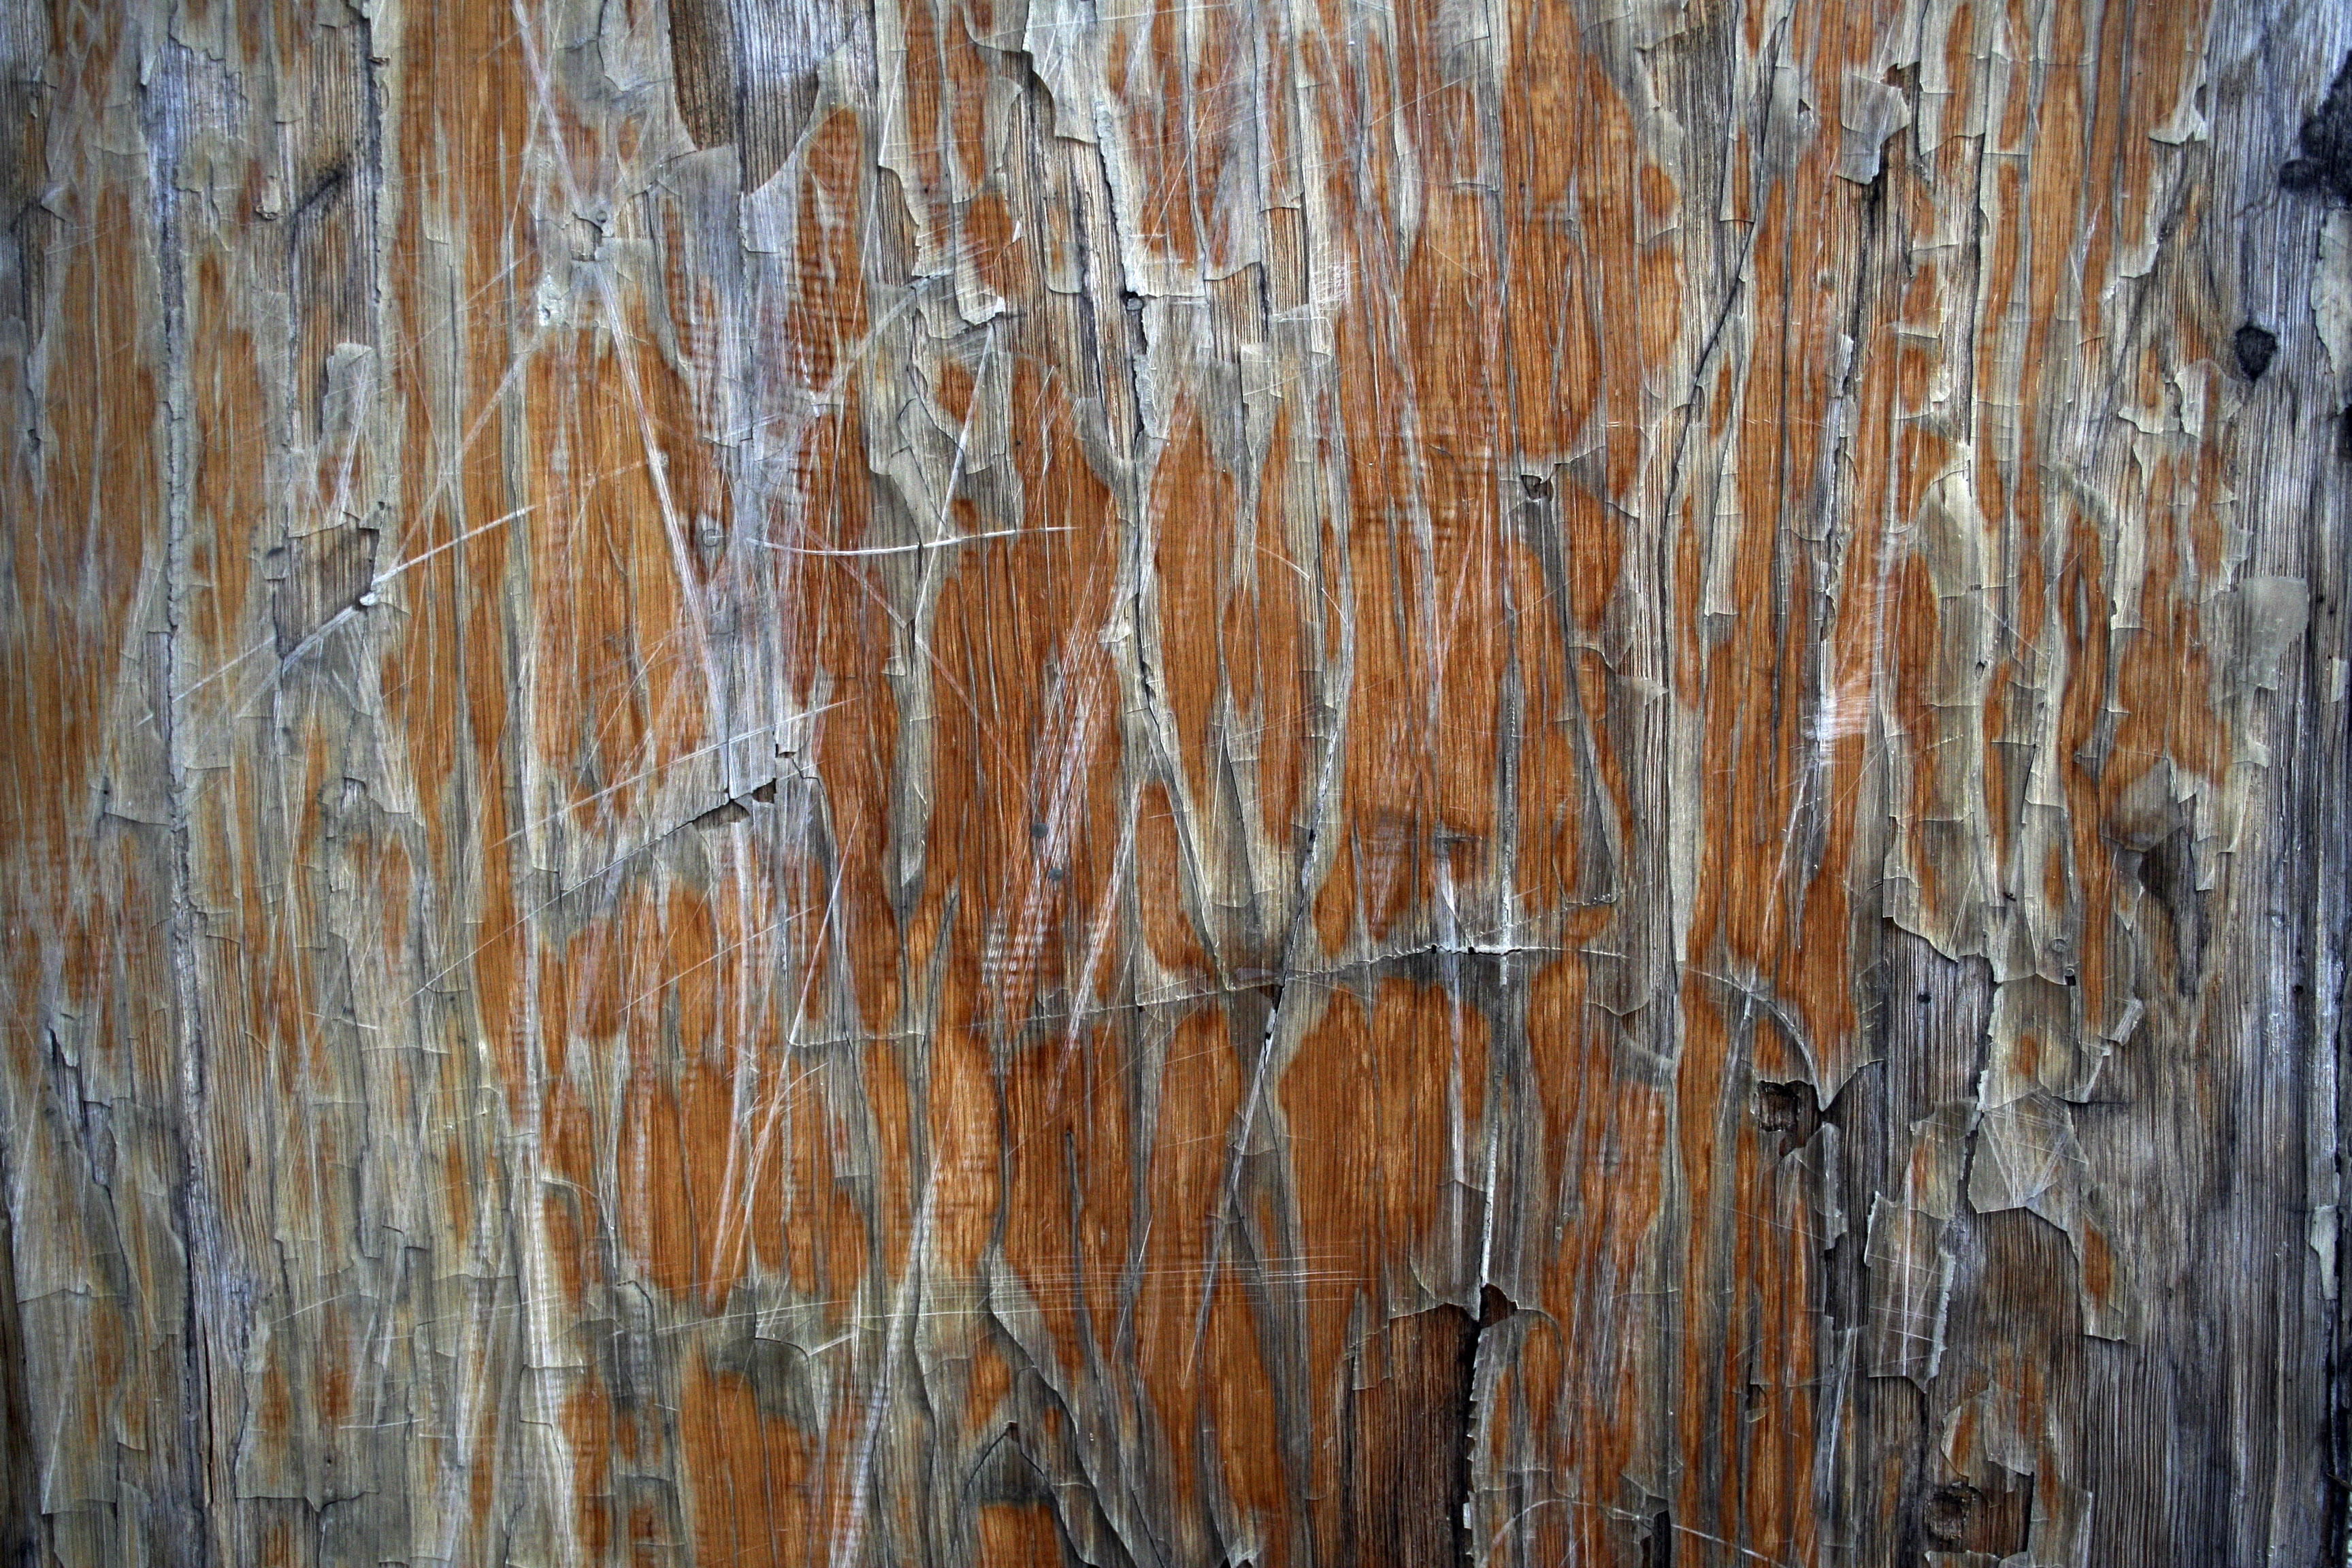 Grunge, Cracked Wood texture | Textures for photoshop free